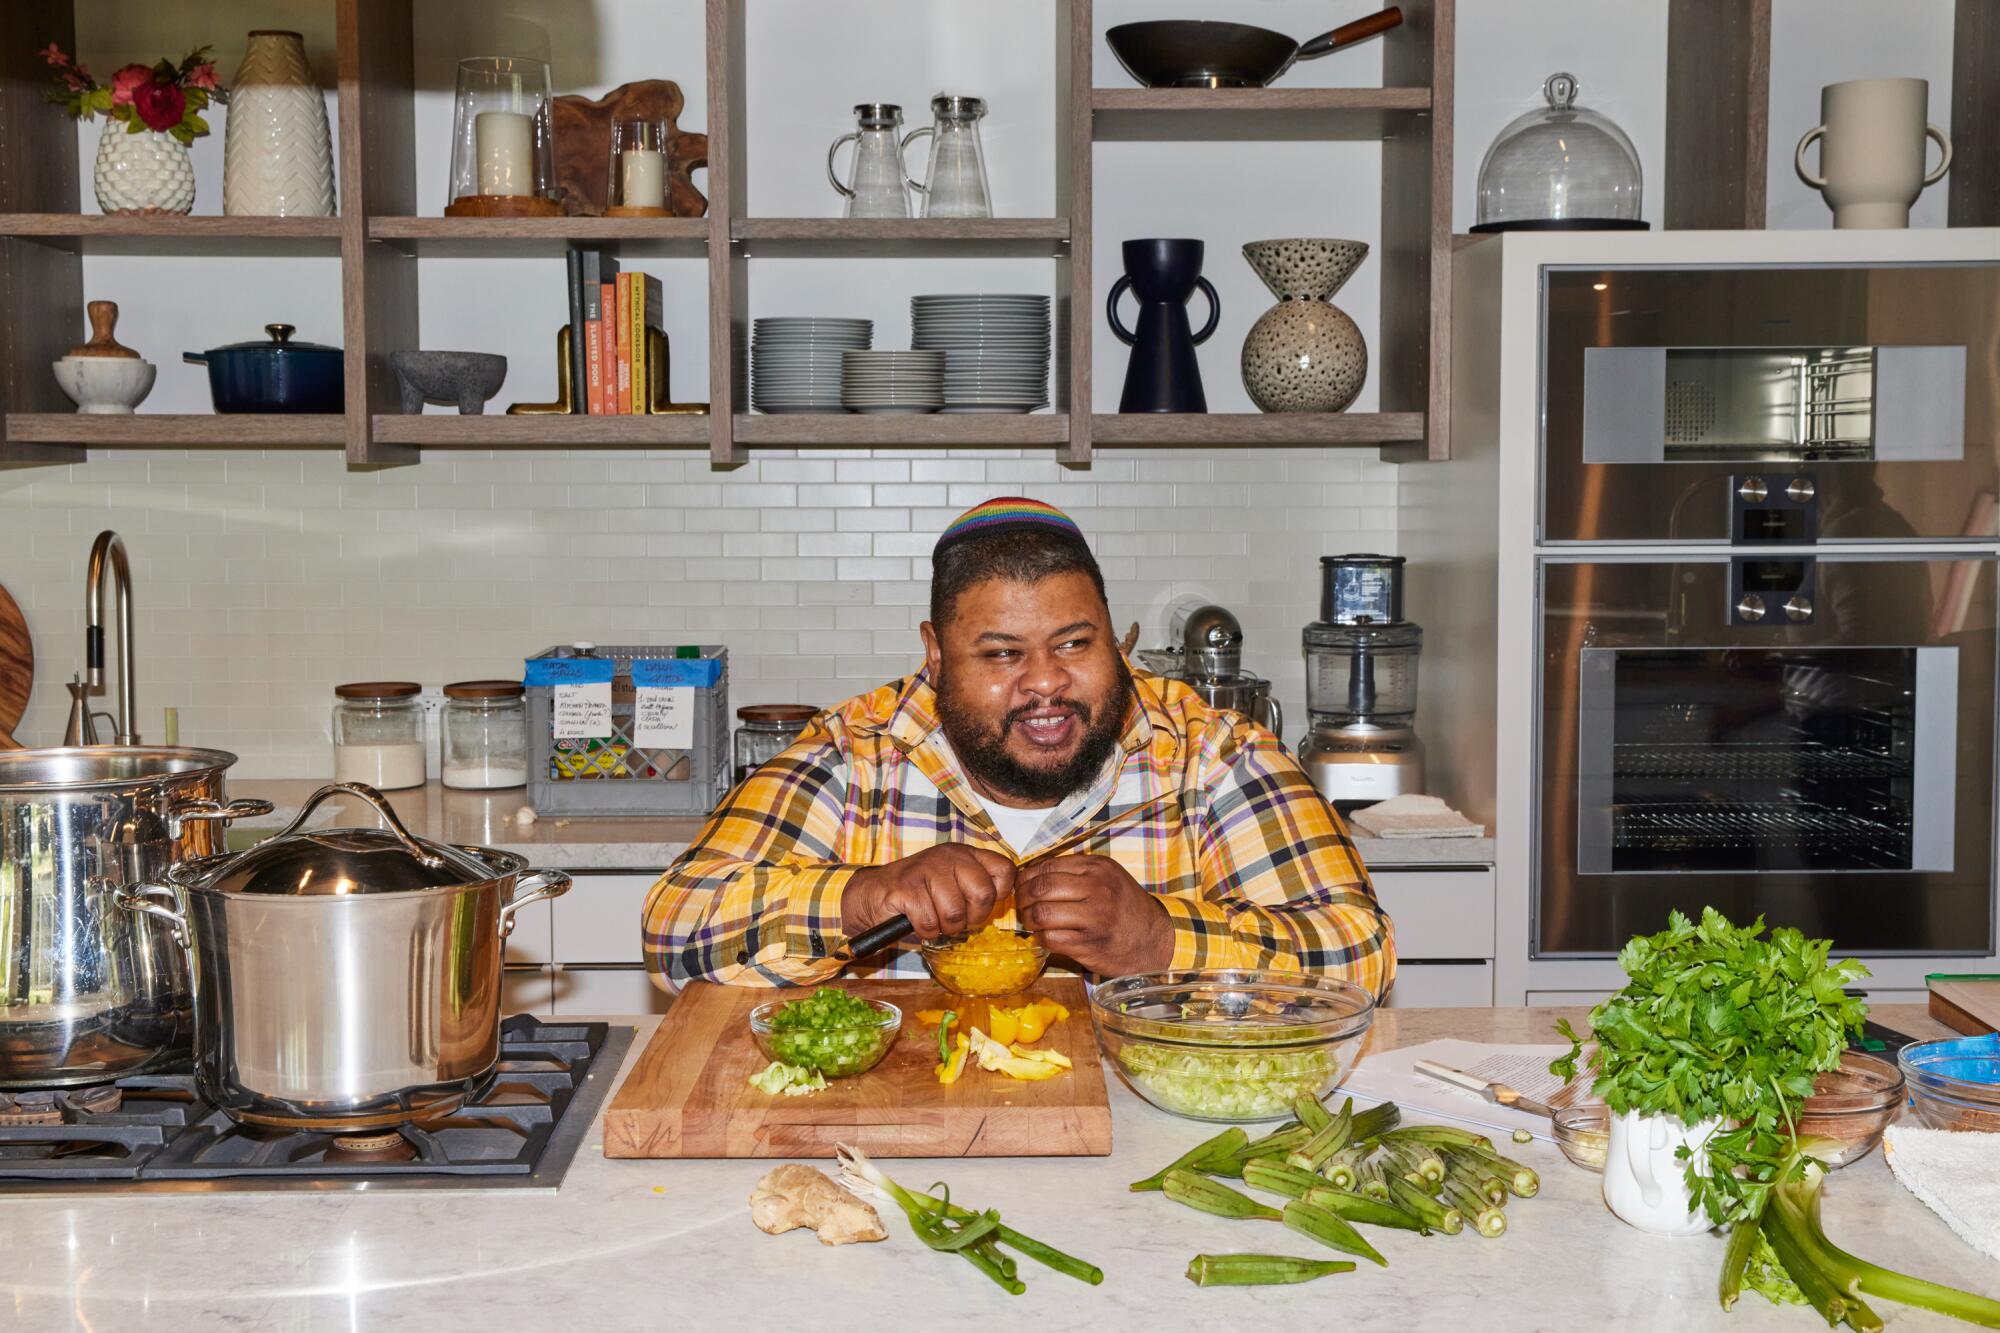 Culinary historian Michael Twitty cuts vegetables for his okra gumbo, a recipe featured in his book "Koshersoul."